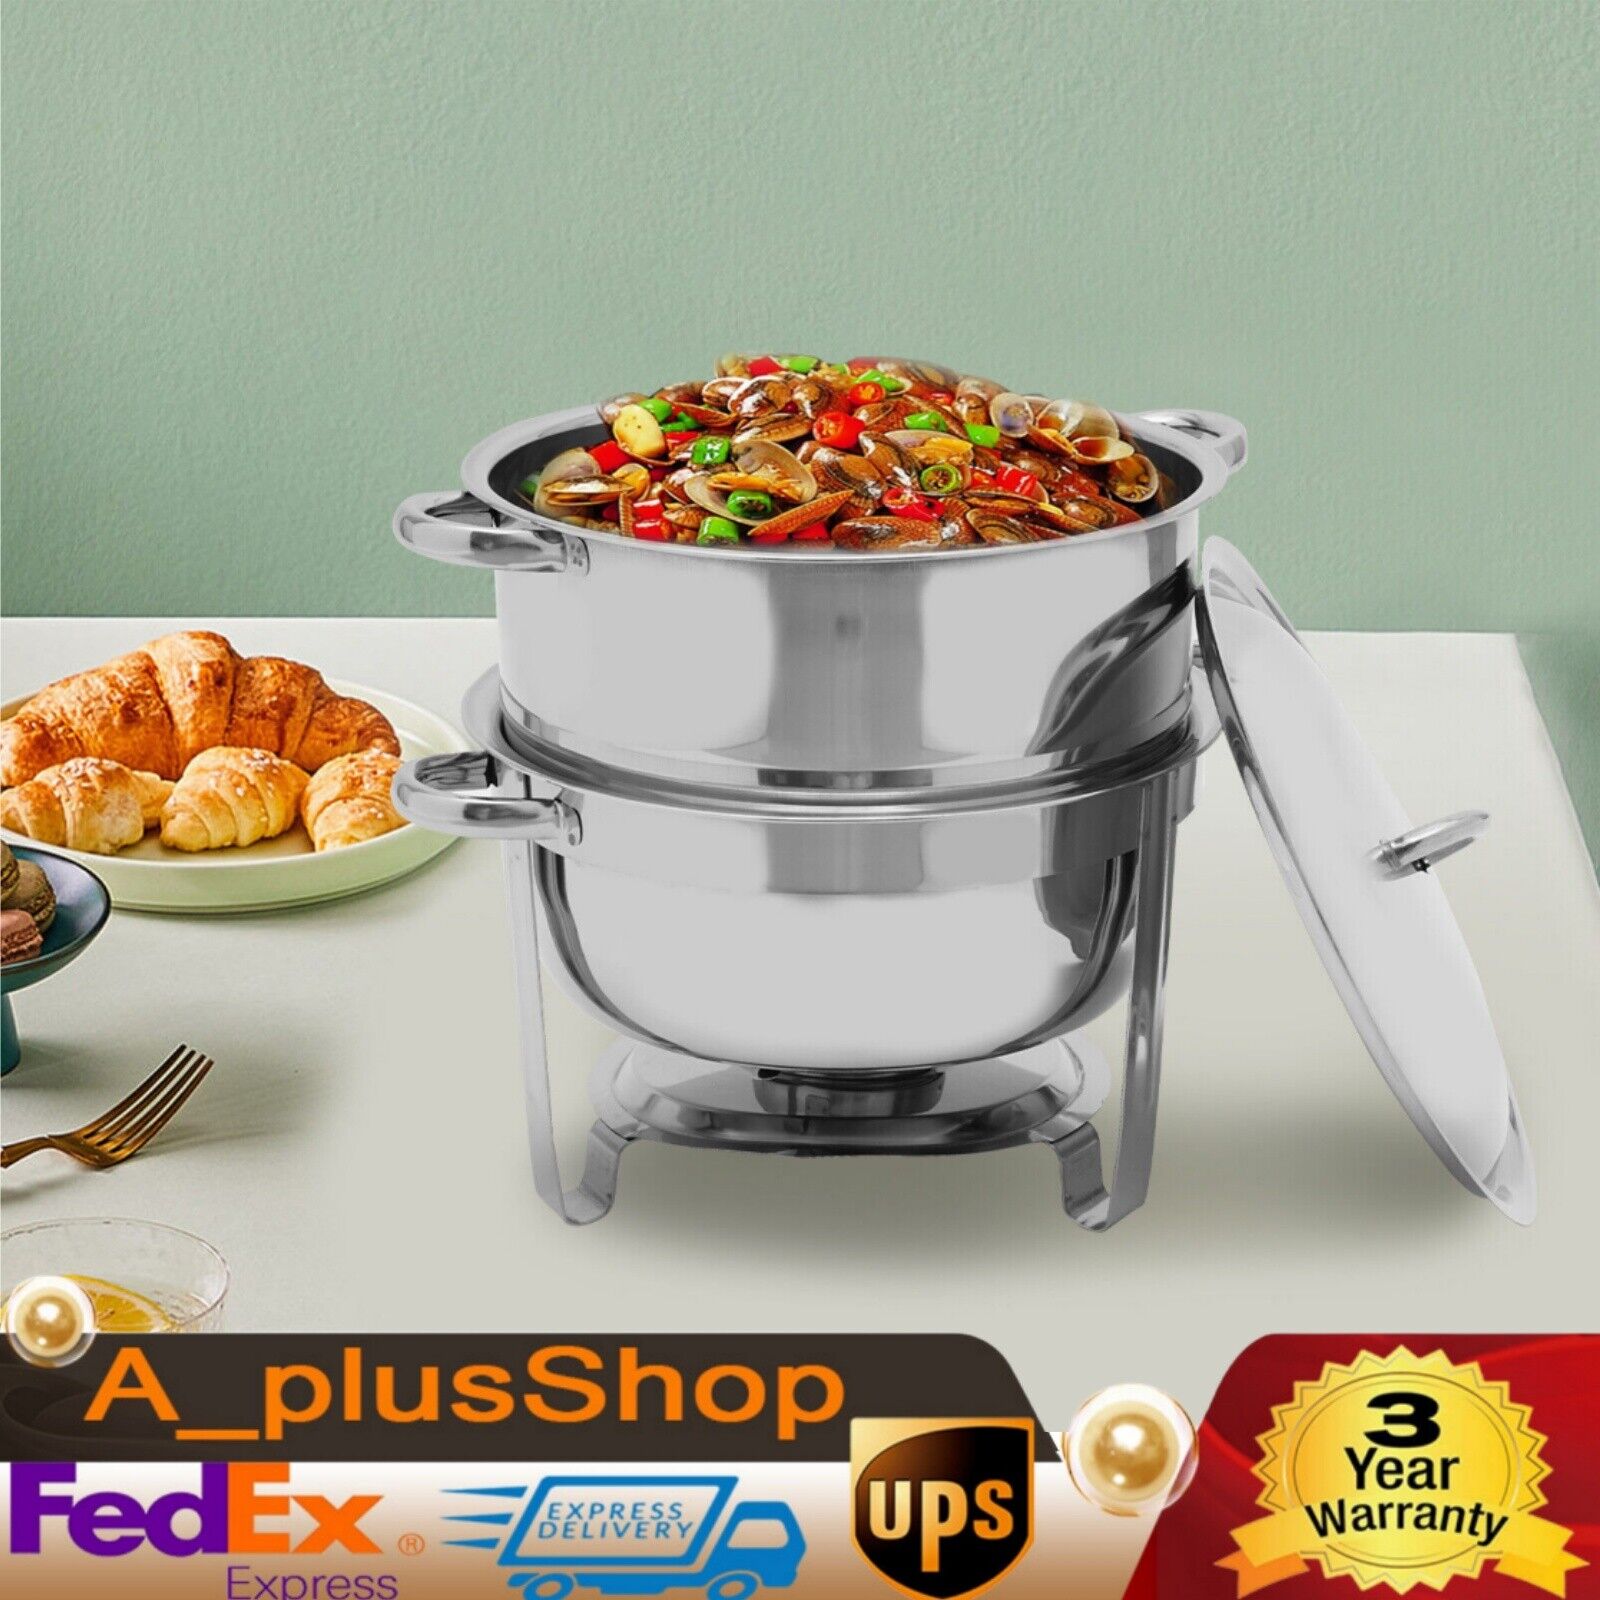 Round Chafing Dish W/Lid 14.2QT Buffet Server Chafer Food Warmer Stainless Steel